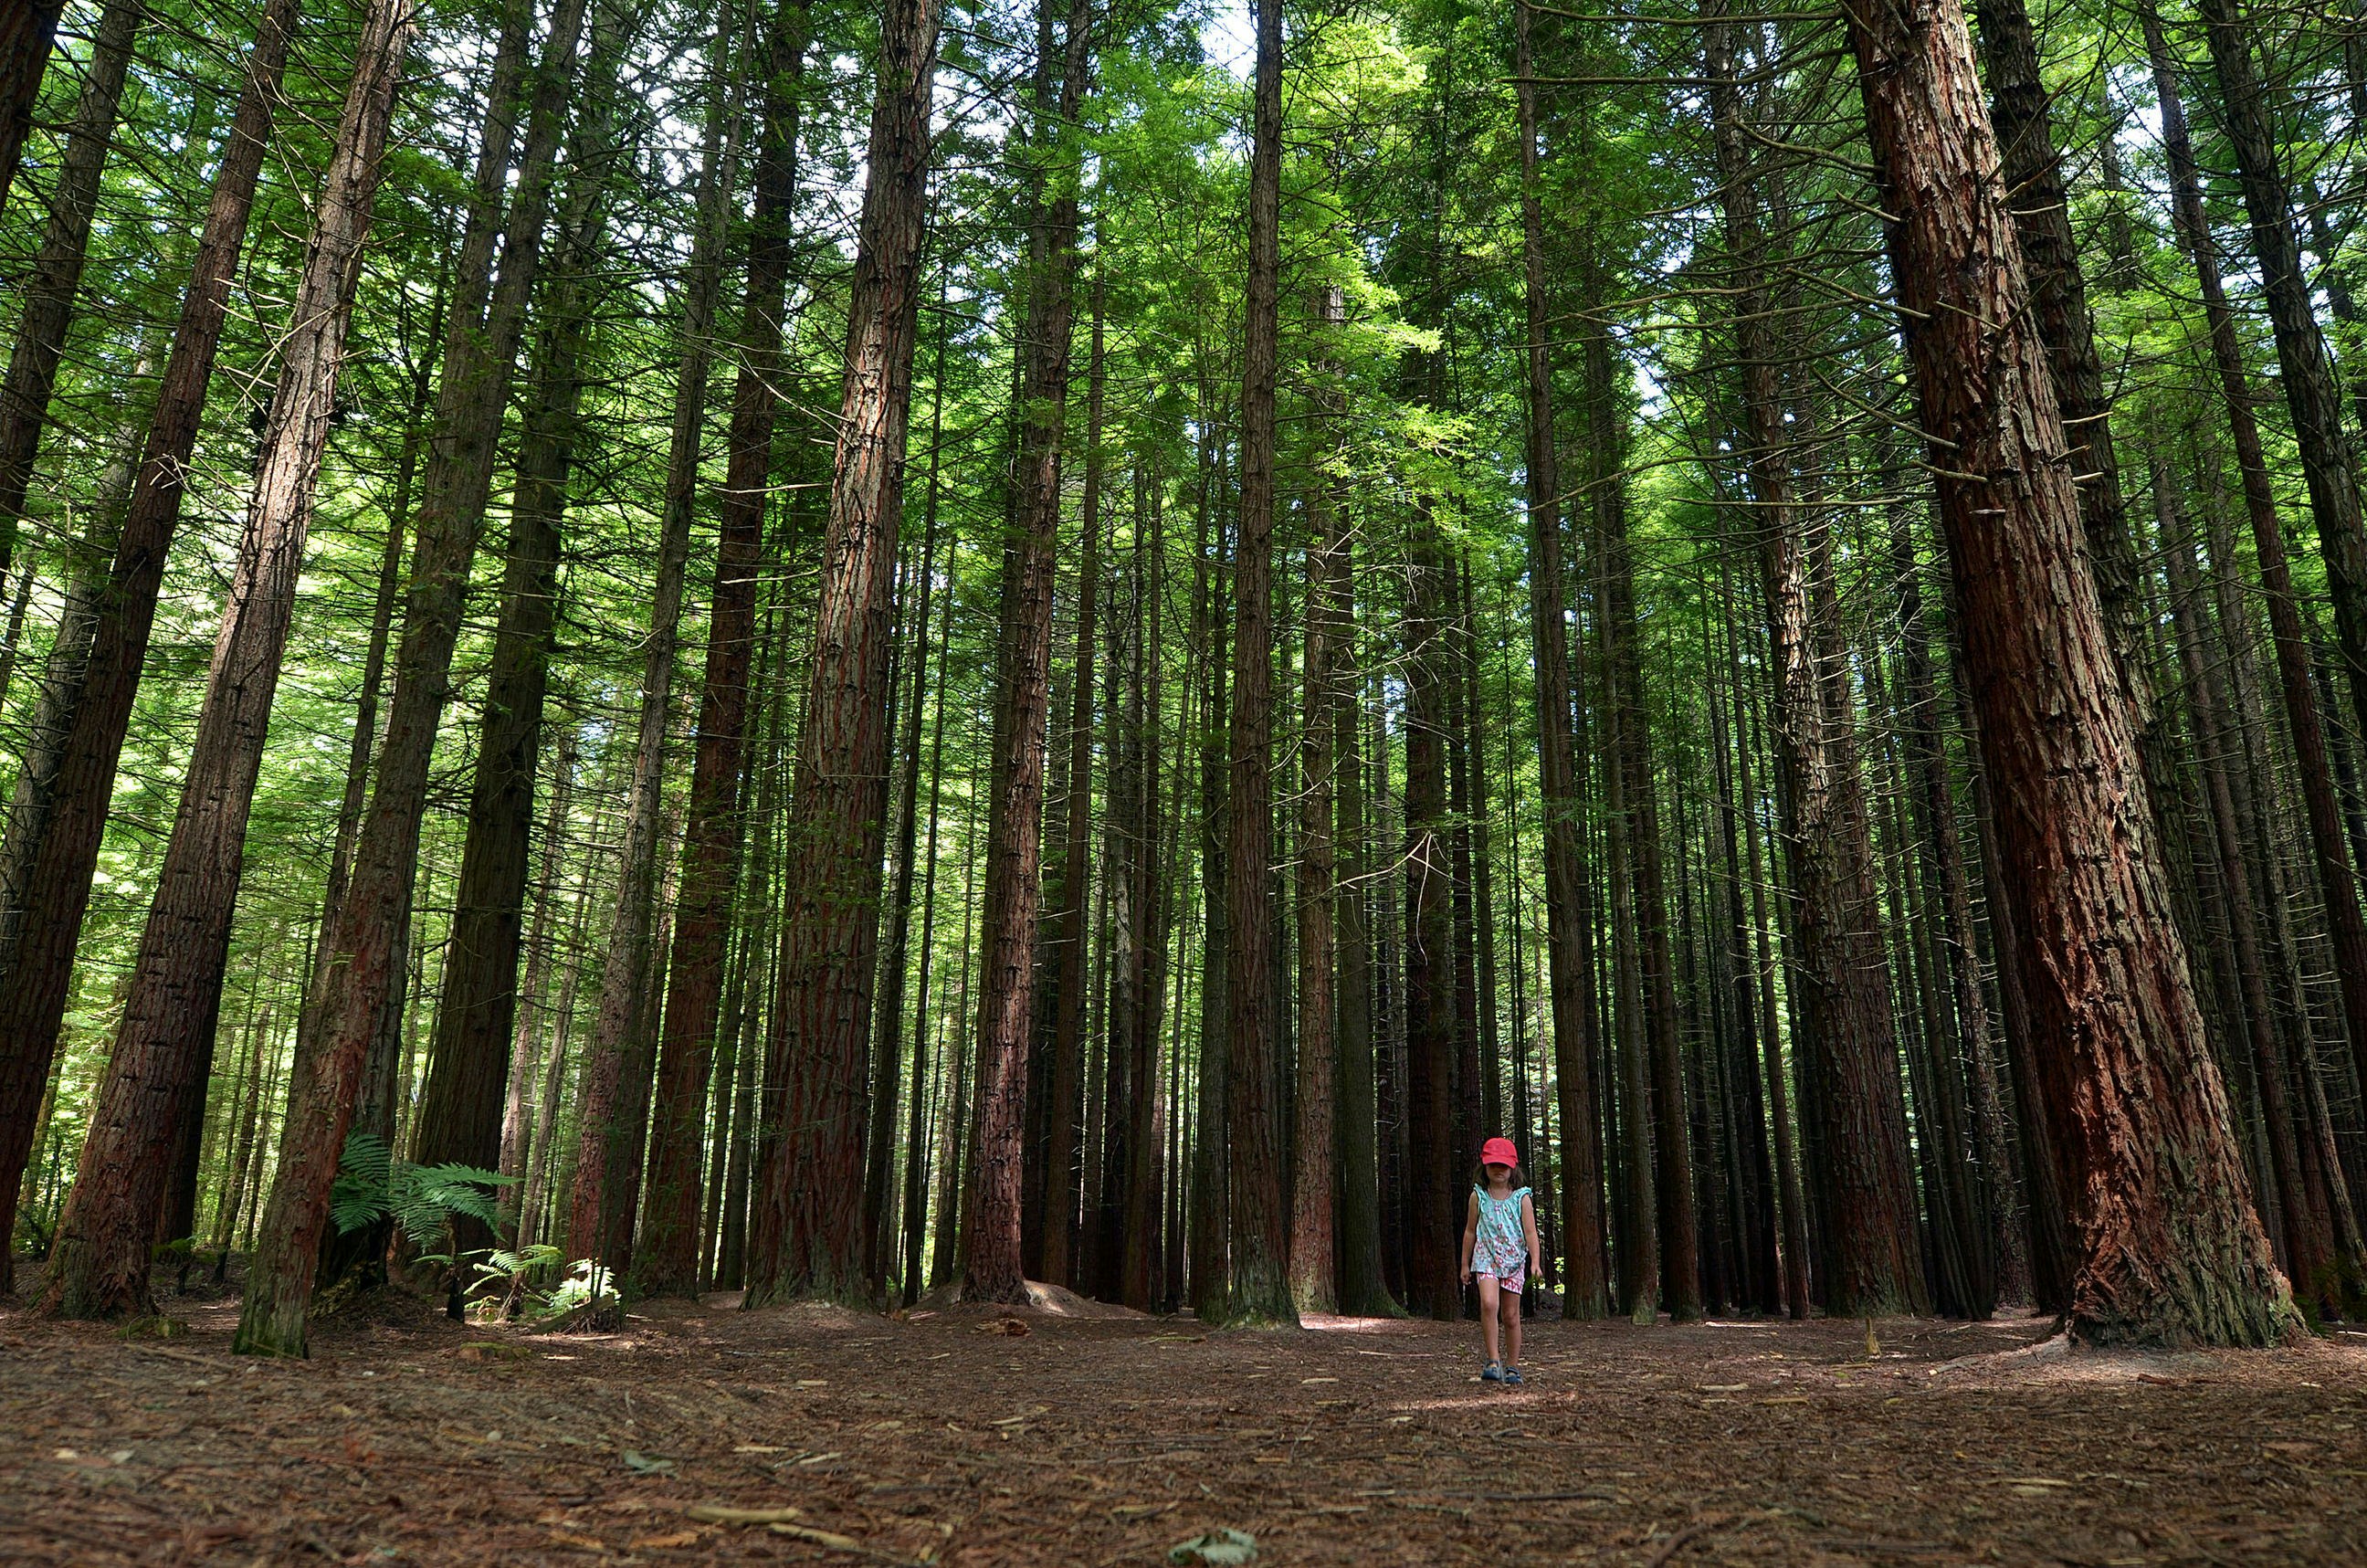 A young girl wearing shorts, a tshirt, a red baseball cap and blue trainers walks through a forest of towering redwood trees. Sunlight seeps through the gaps in the canopy above.